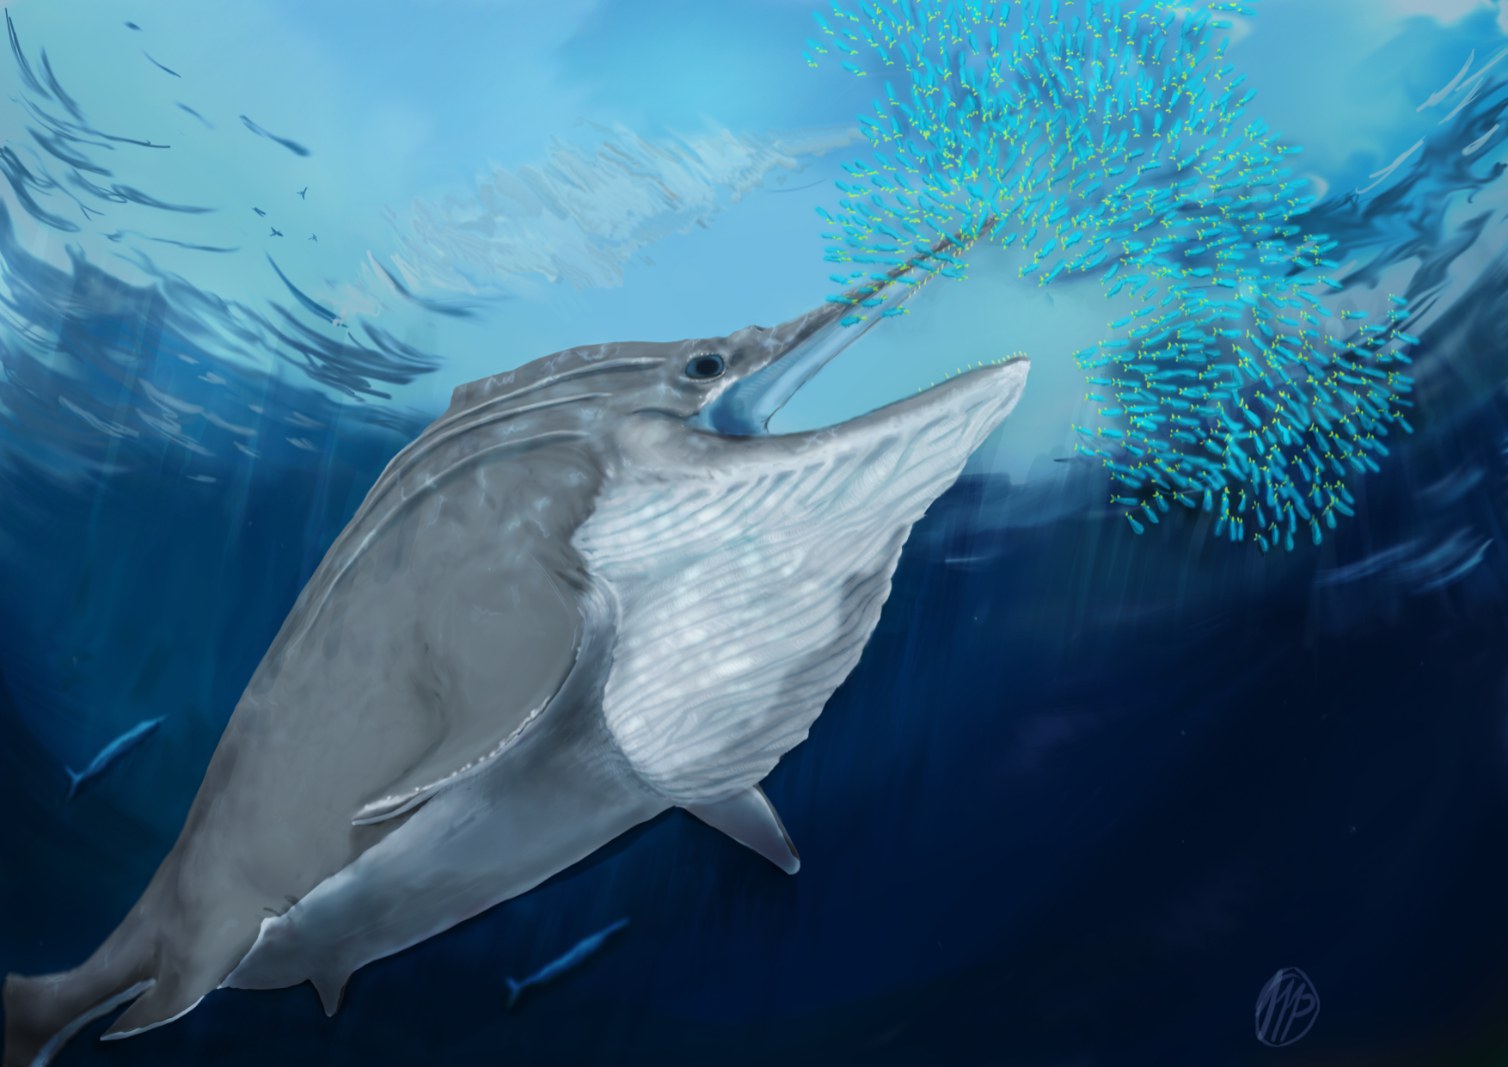 Life reconstruction of a giant ichthyosaur from the Late Triassic bulk-feeding on a school of squid.